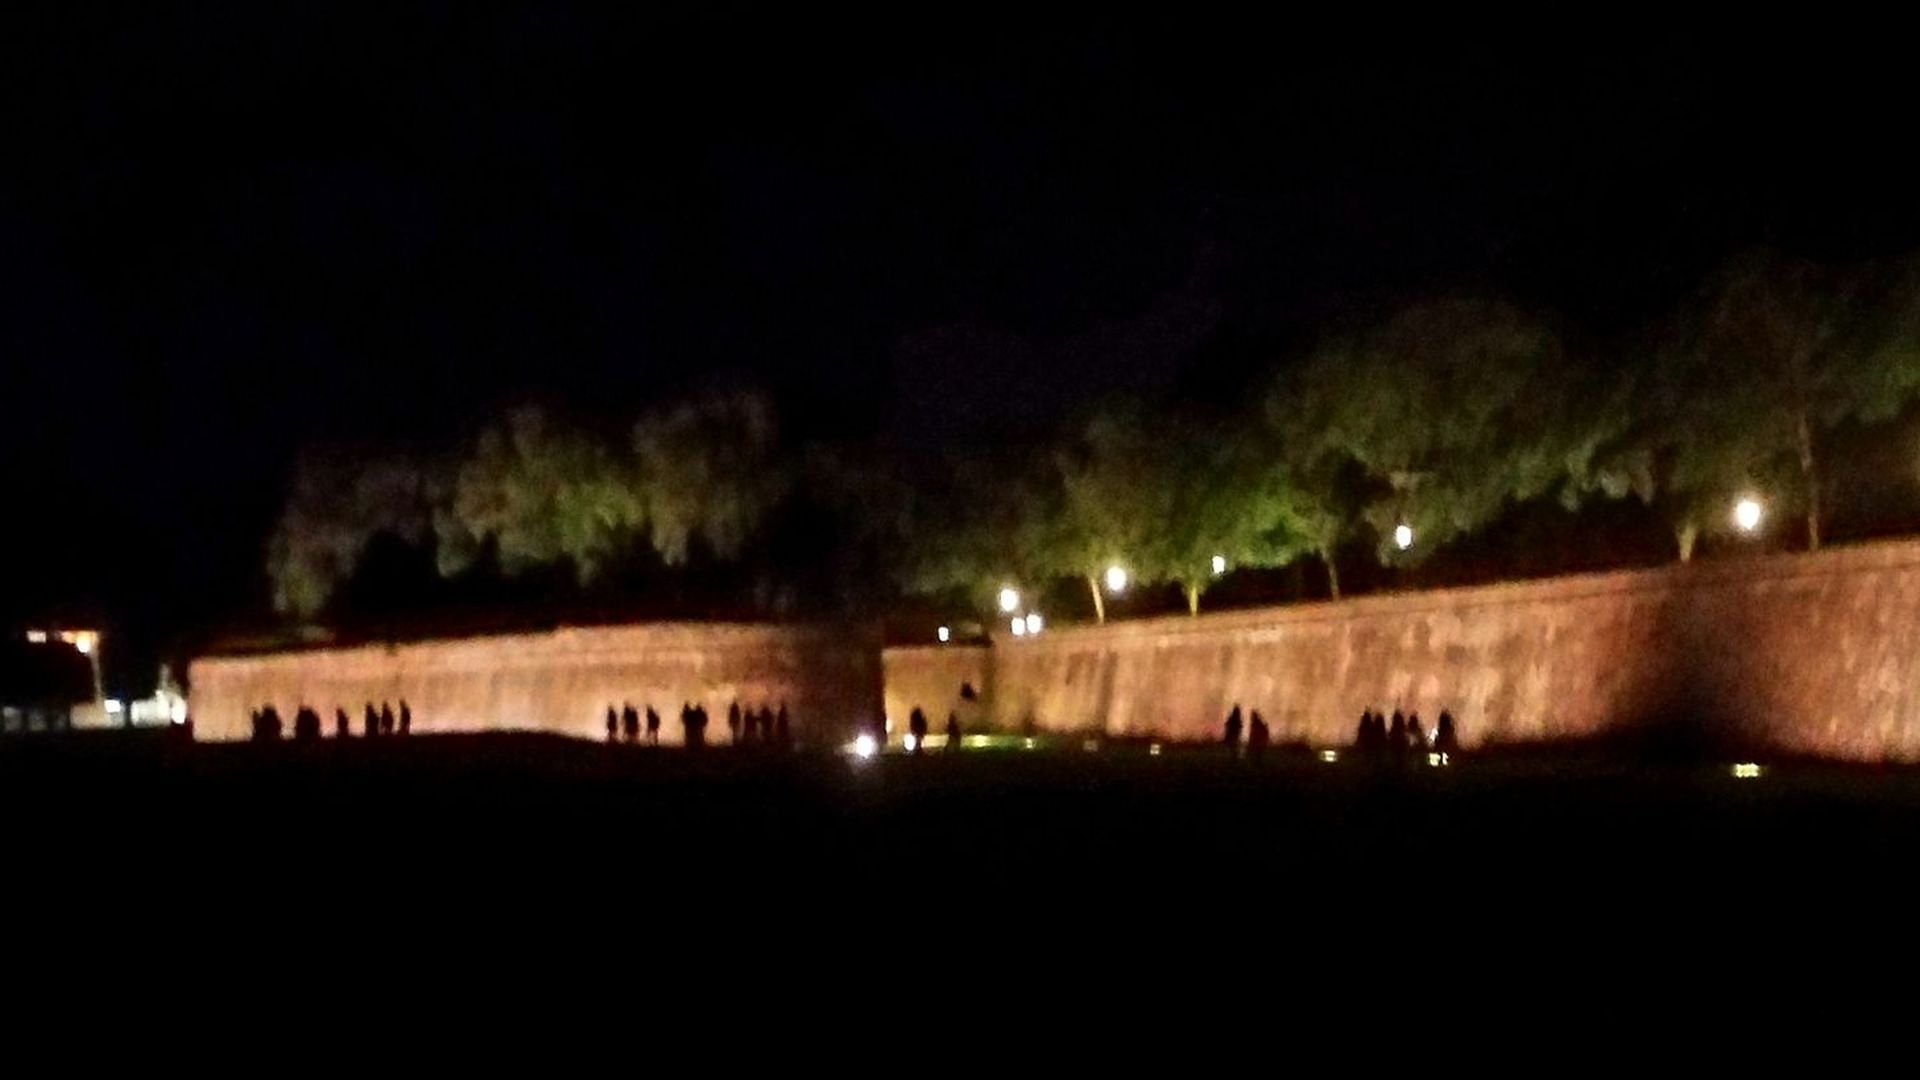 The walls of Lucca by night